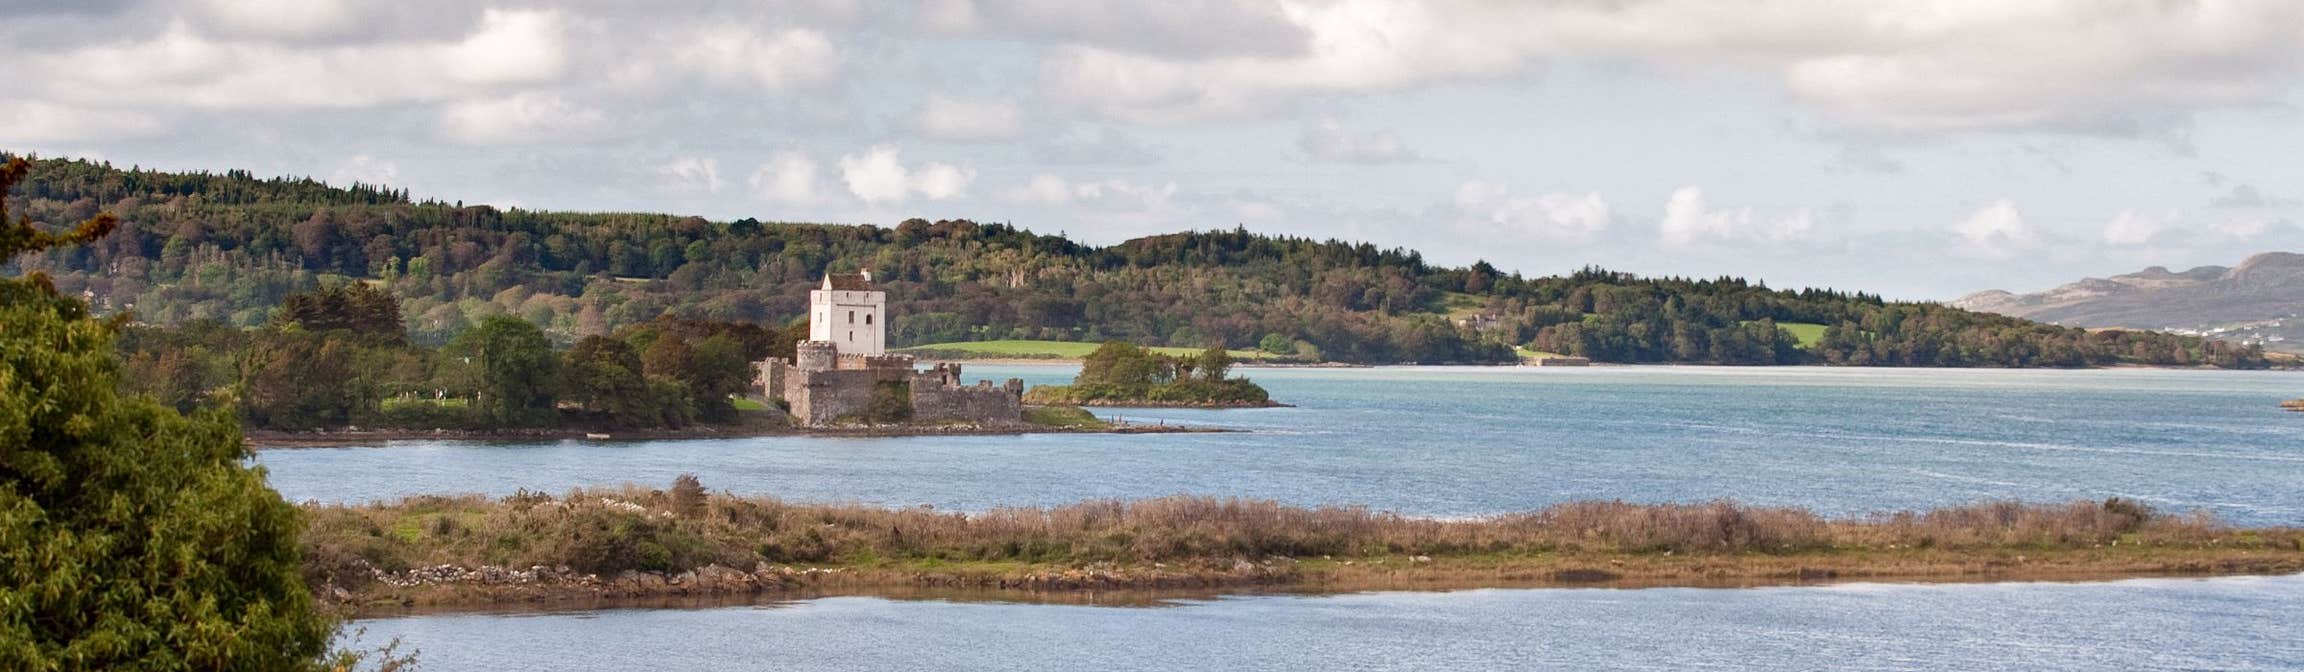 Image of Doe Castle in Creeslough in County Donegal